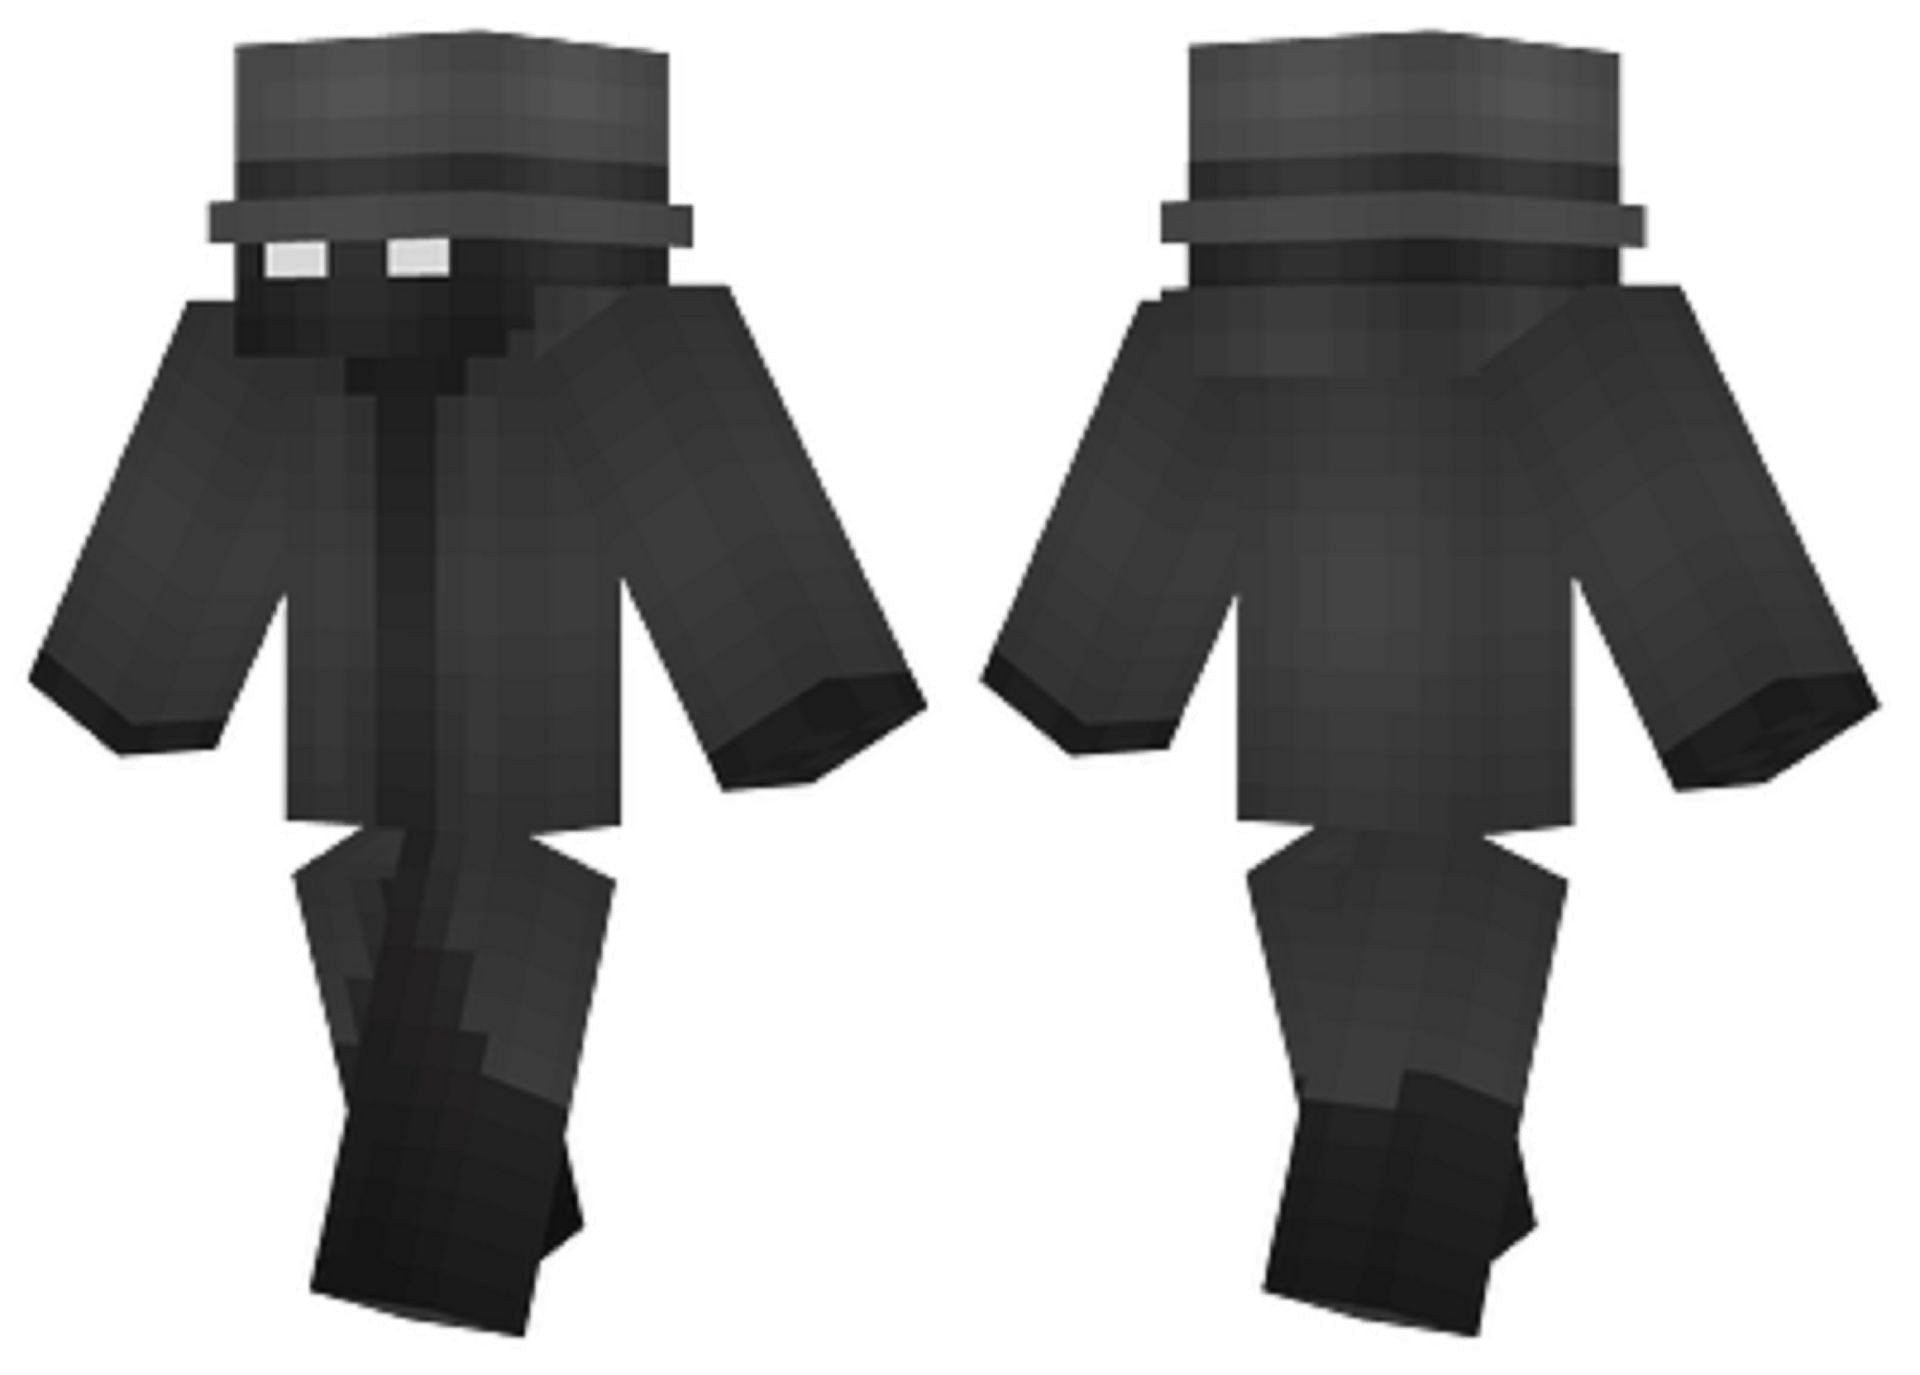 This shadowy skin certainly looks mysterious (Image xTheft/MinecraftSkins.net)